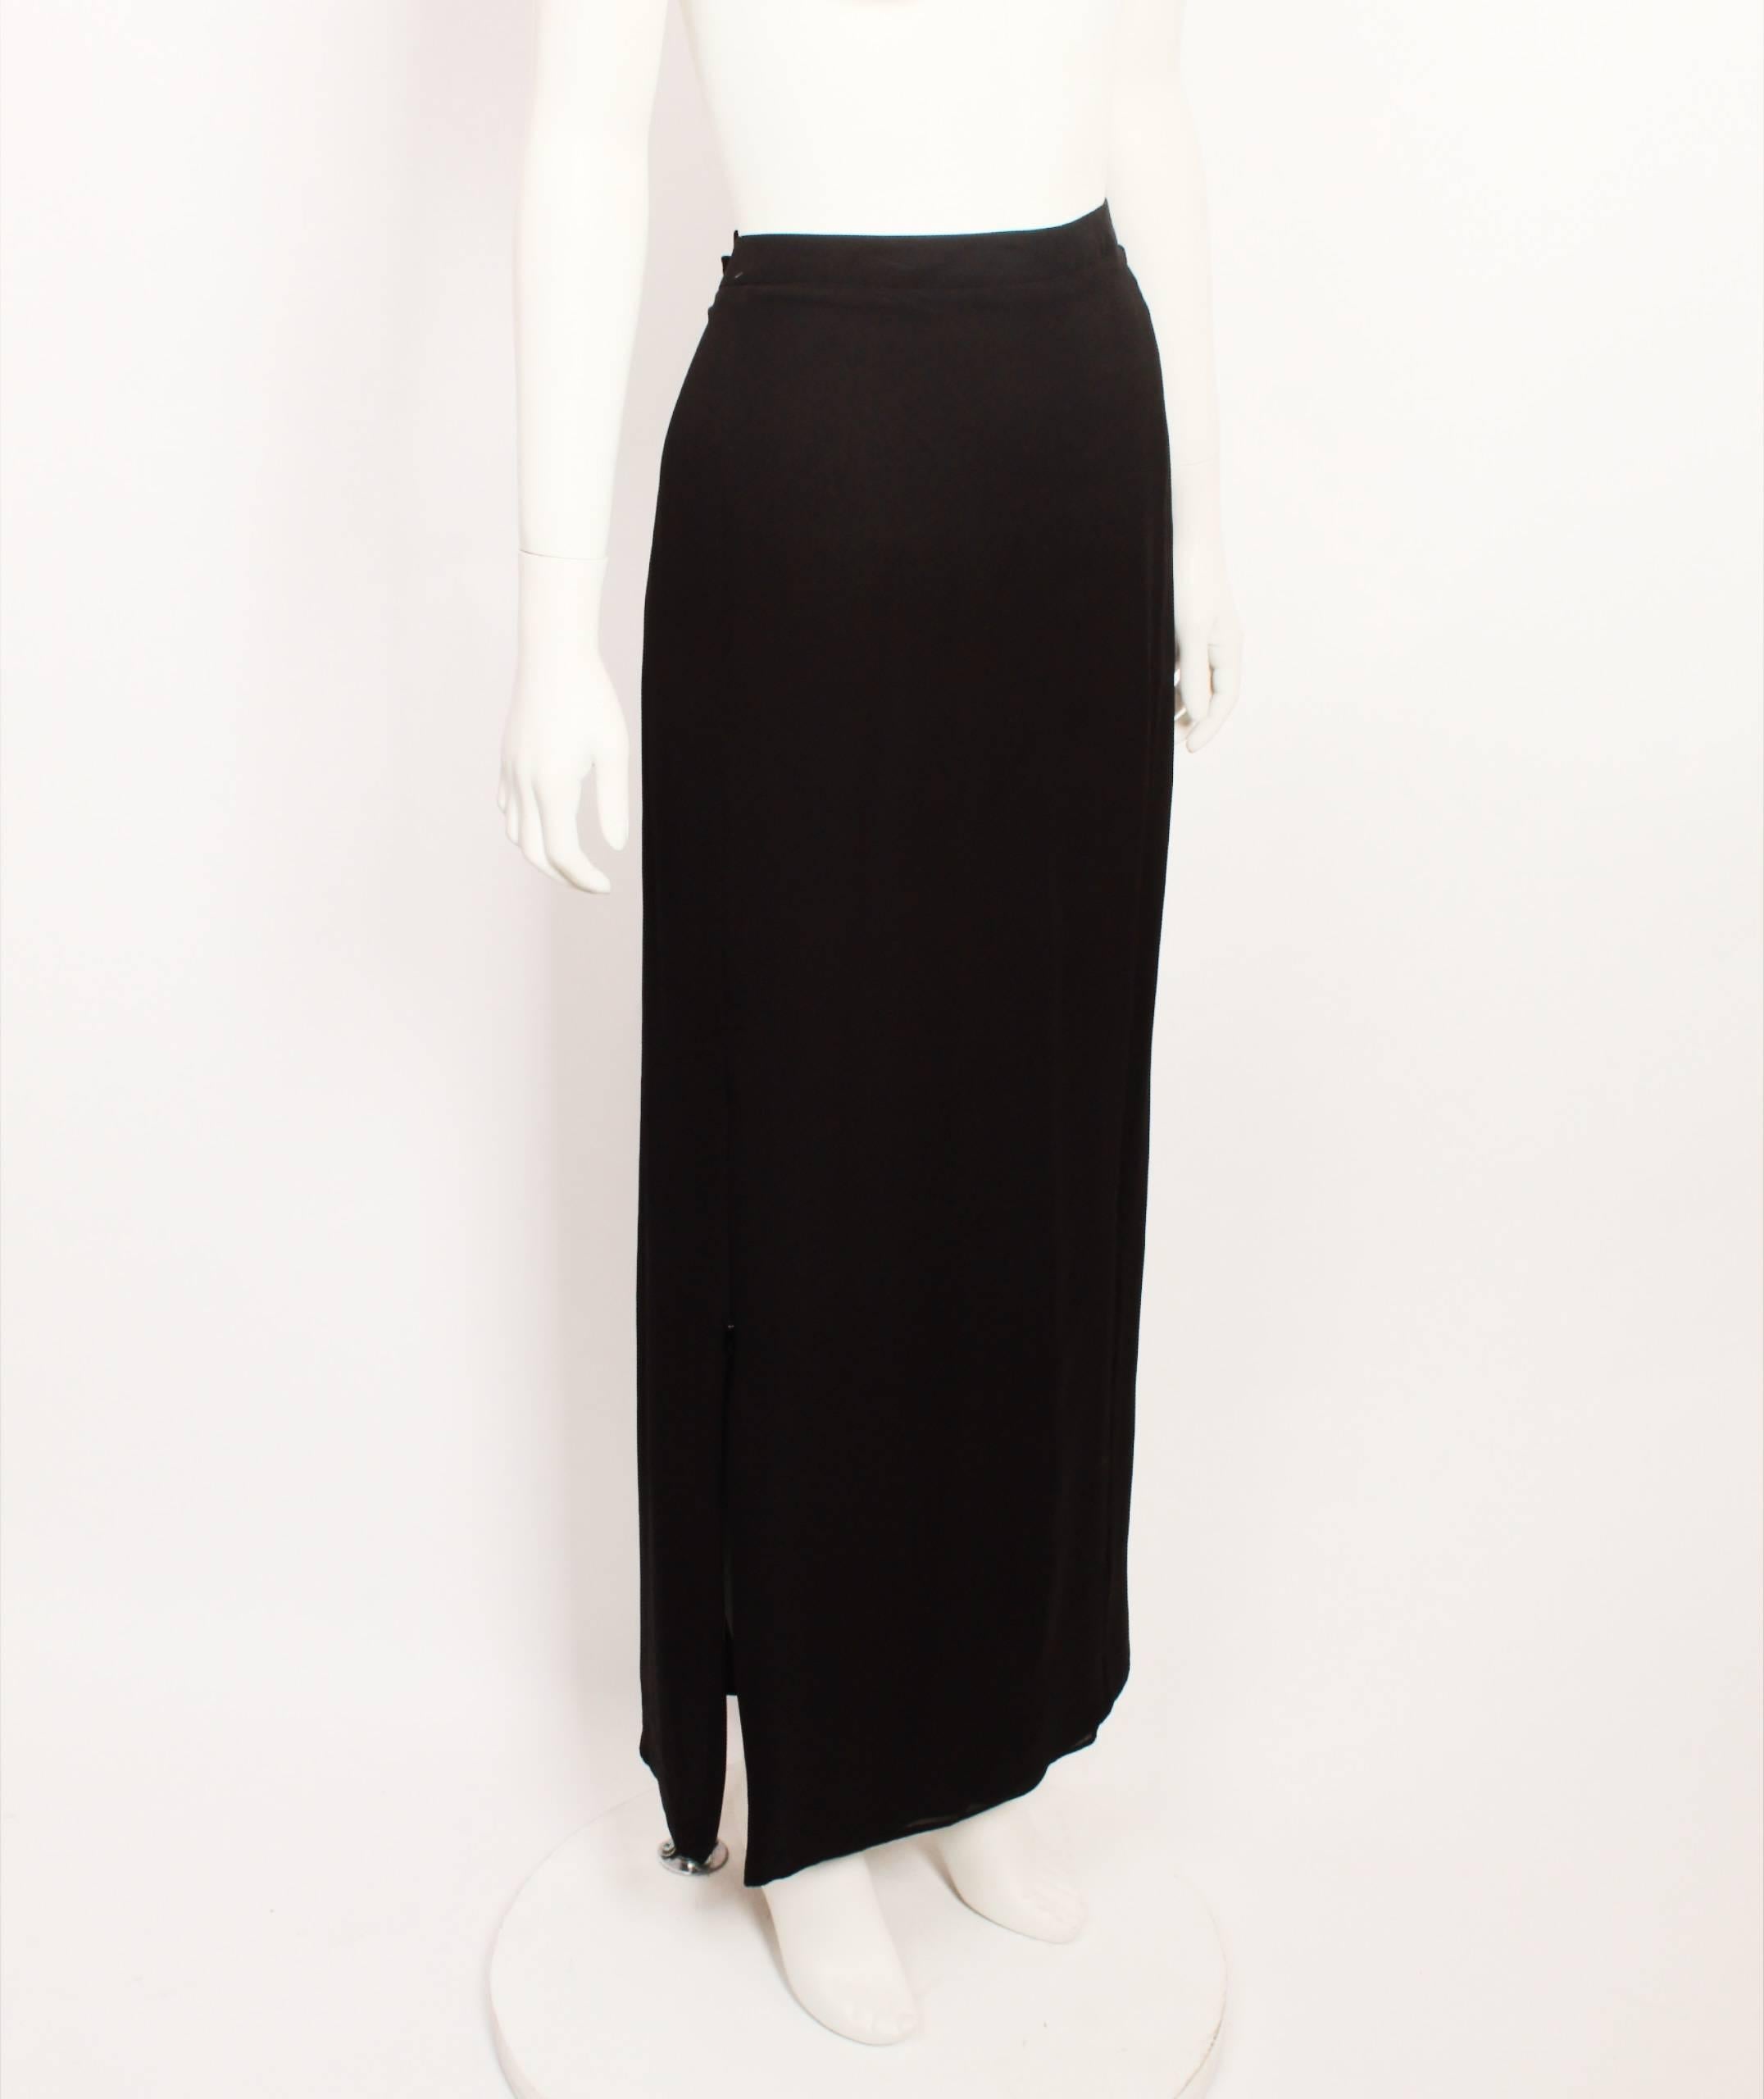 CoSTUME National black silk ankle-length skirt. Clean, strong, minimalist lines. A classic CoSTUME National example. 
Fully lined with back invisible zipper and zipper feature on front,bottom left hand side of skirt. Made in Italy. Size 46.